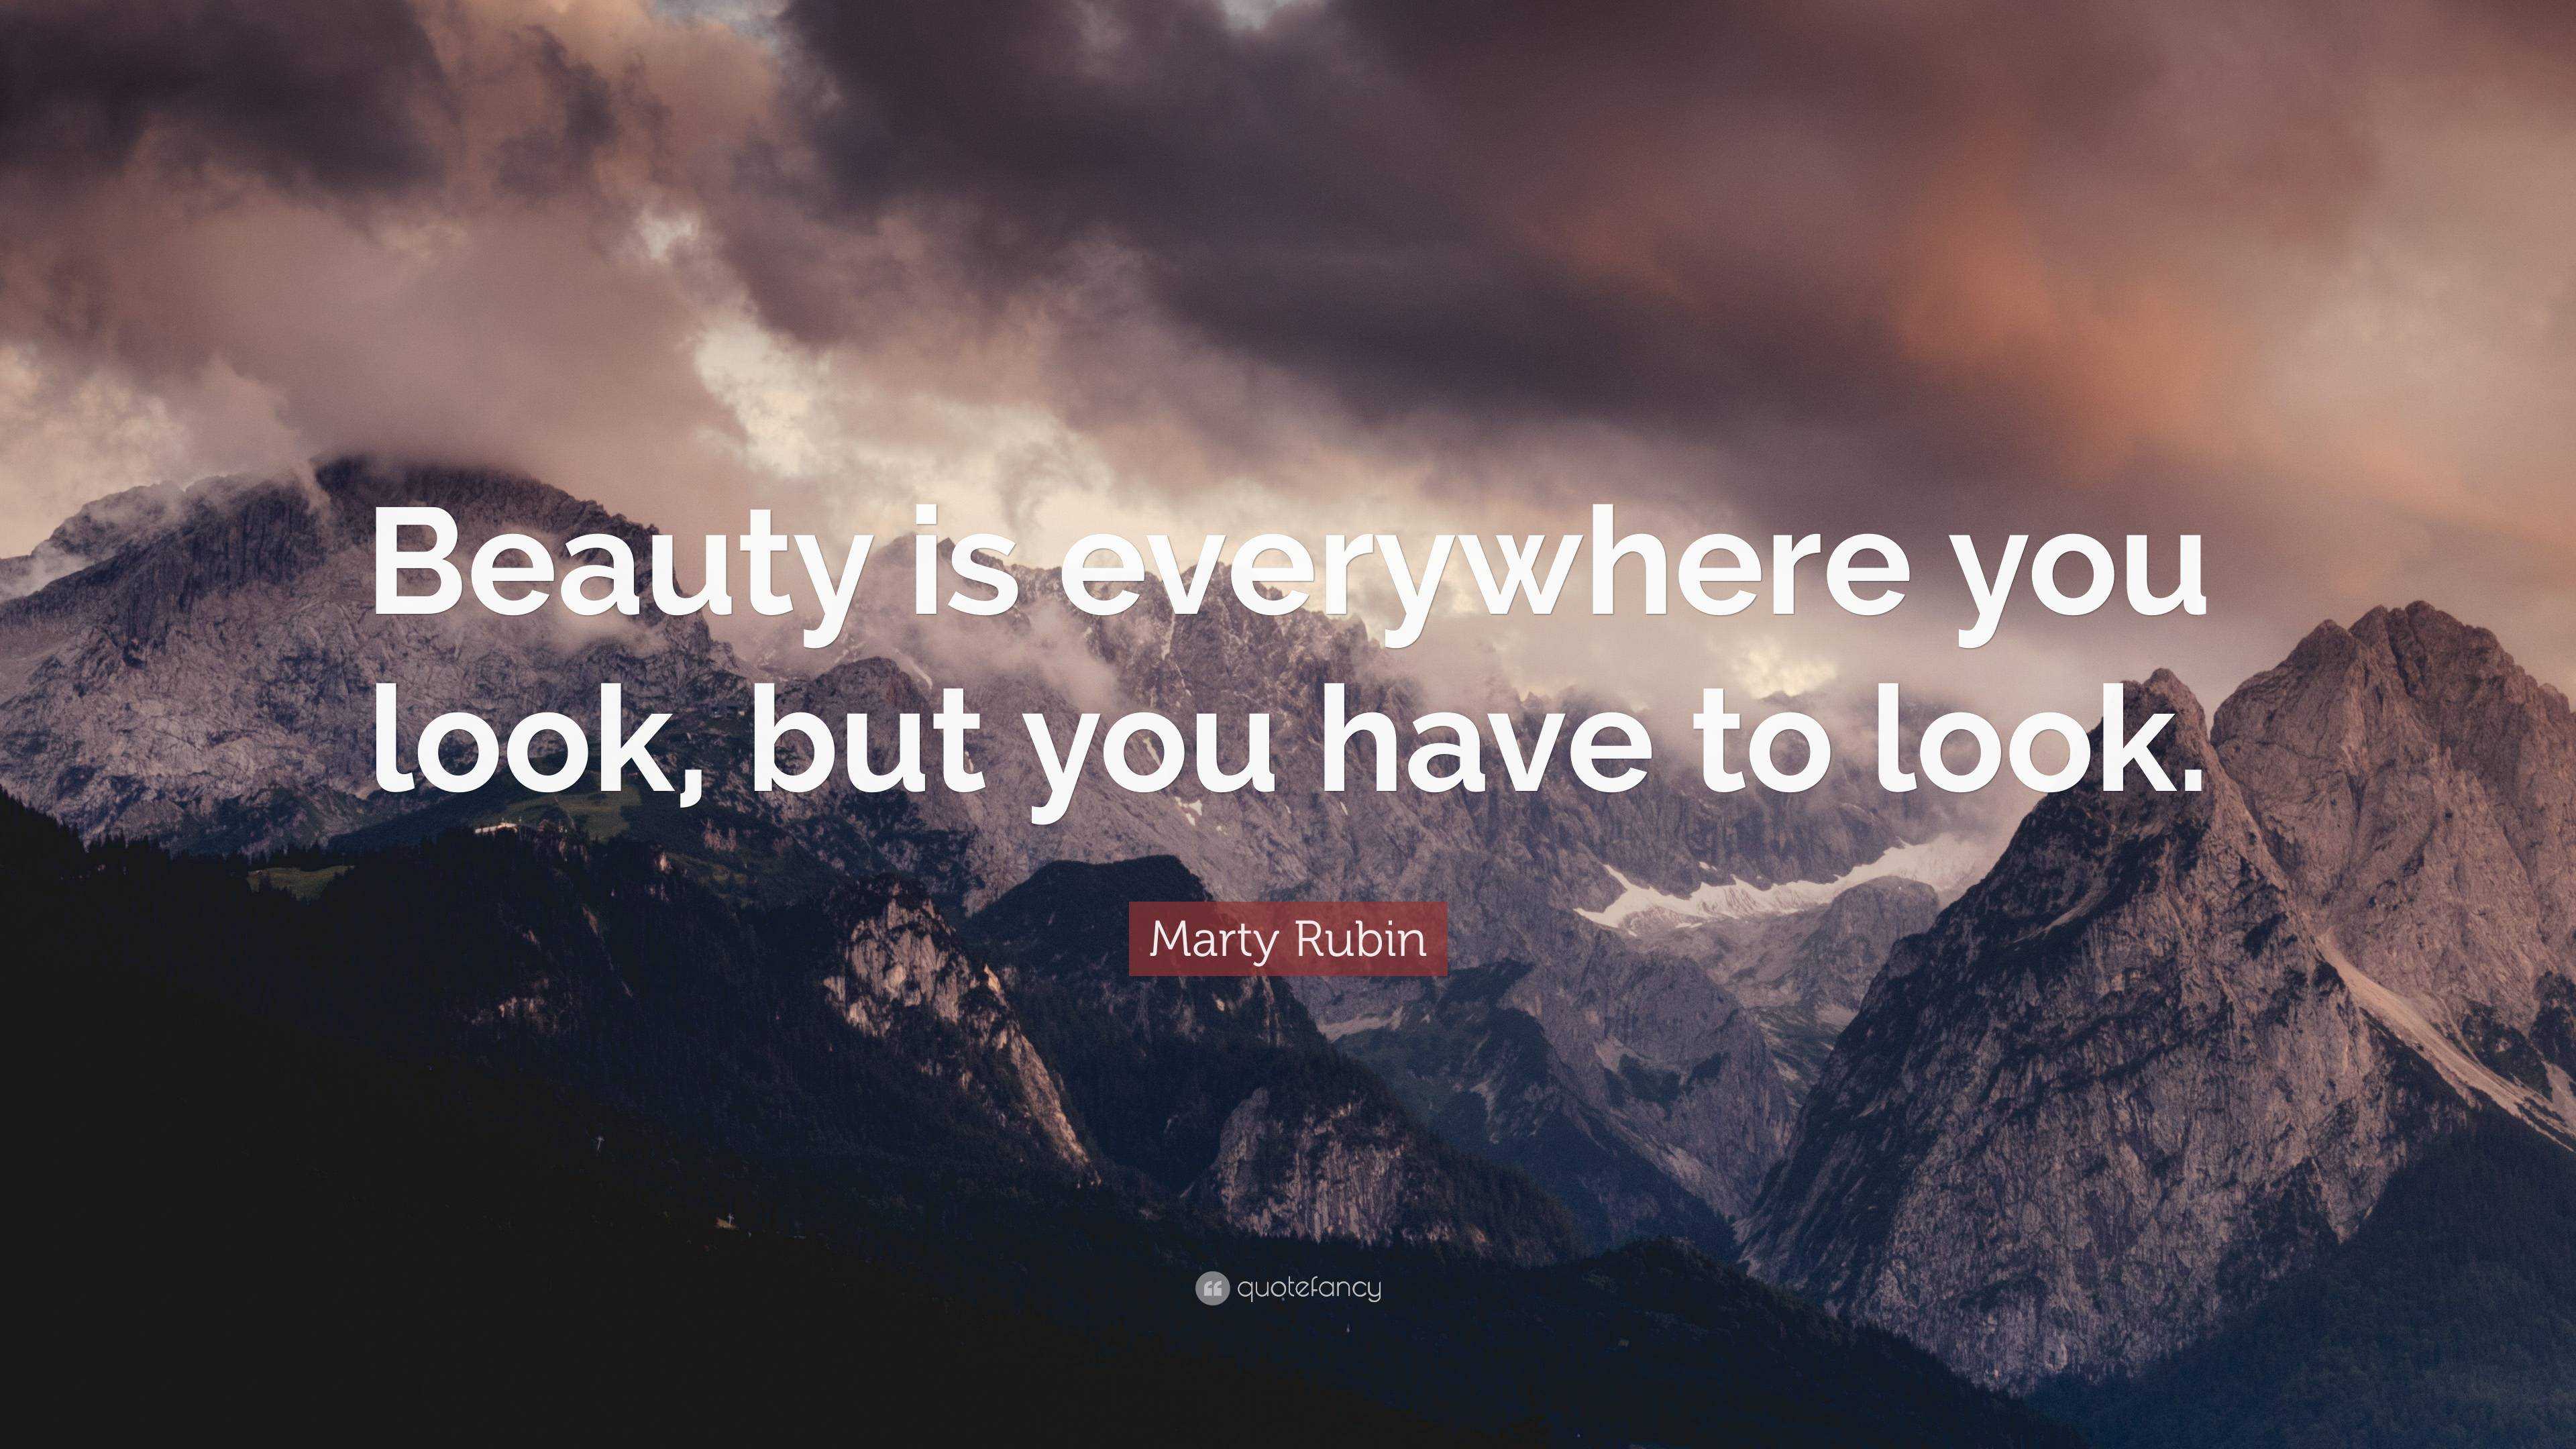 Marty Rubin Quote: “Beauty is everywhere you look, but you have to look.”